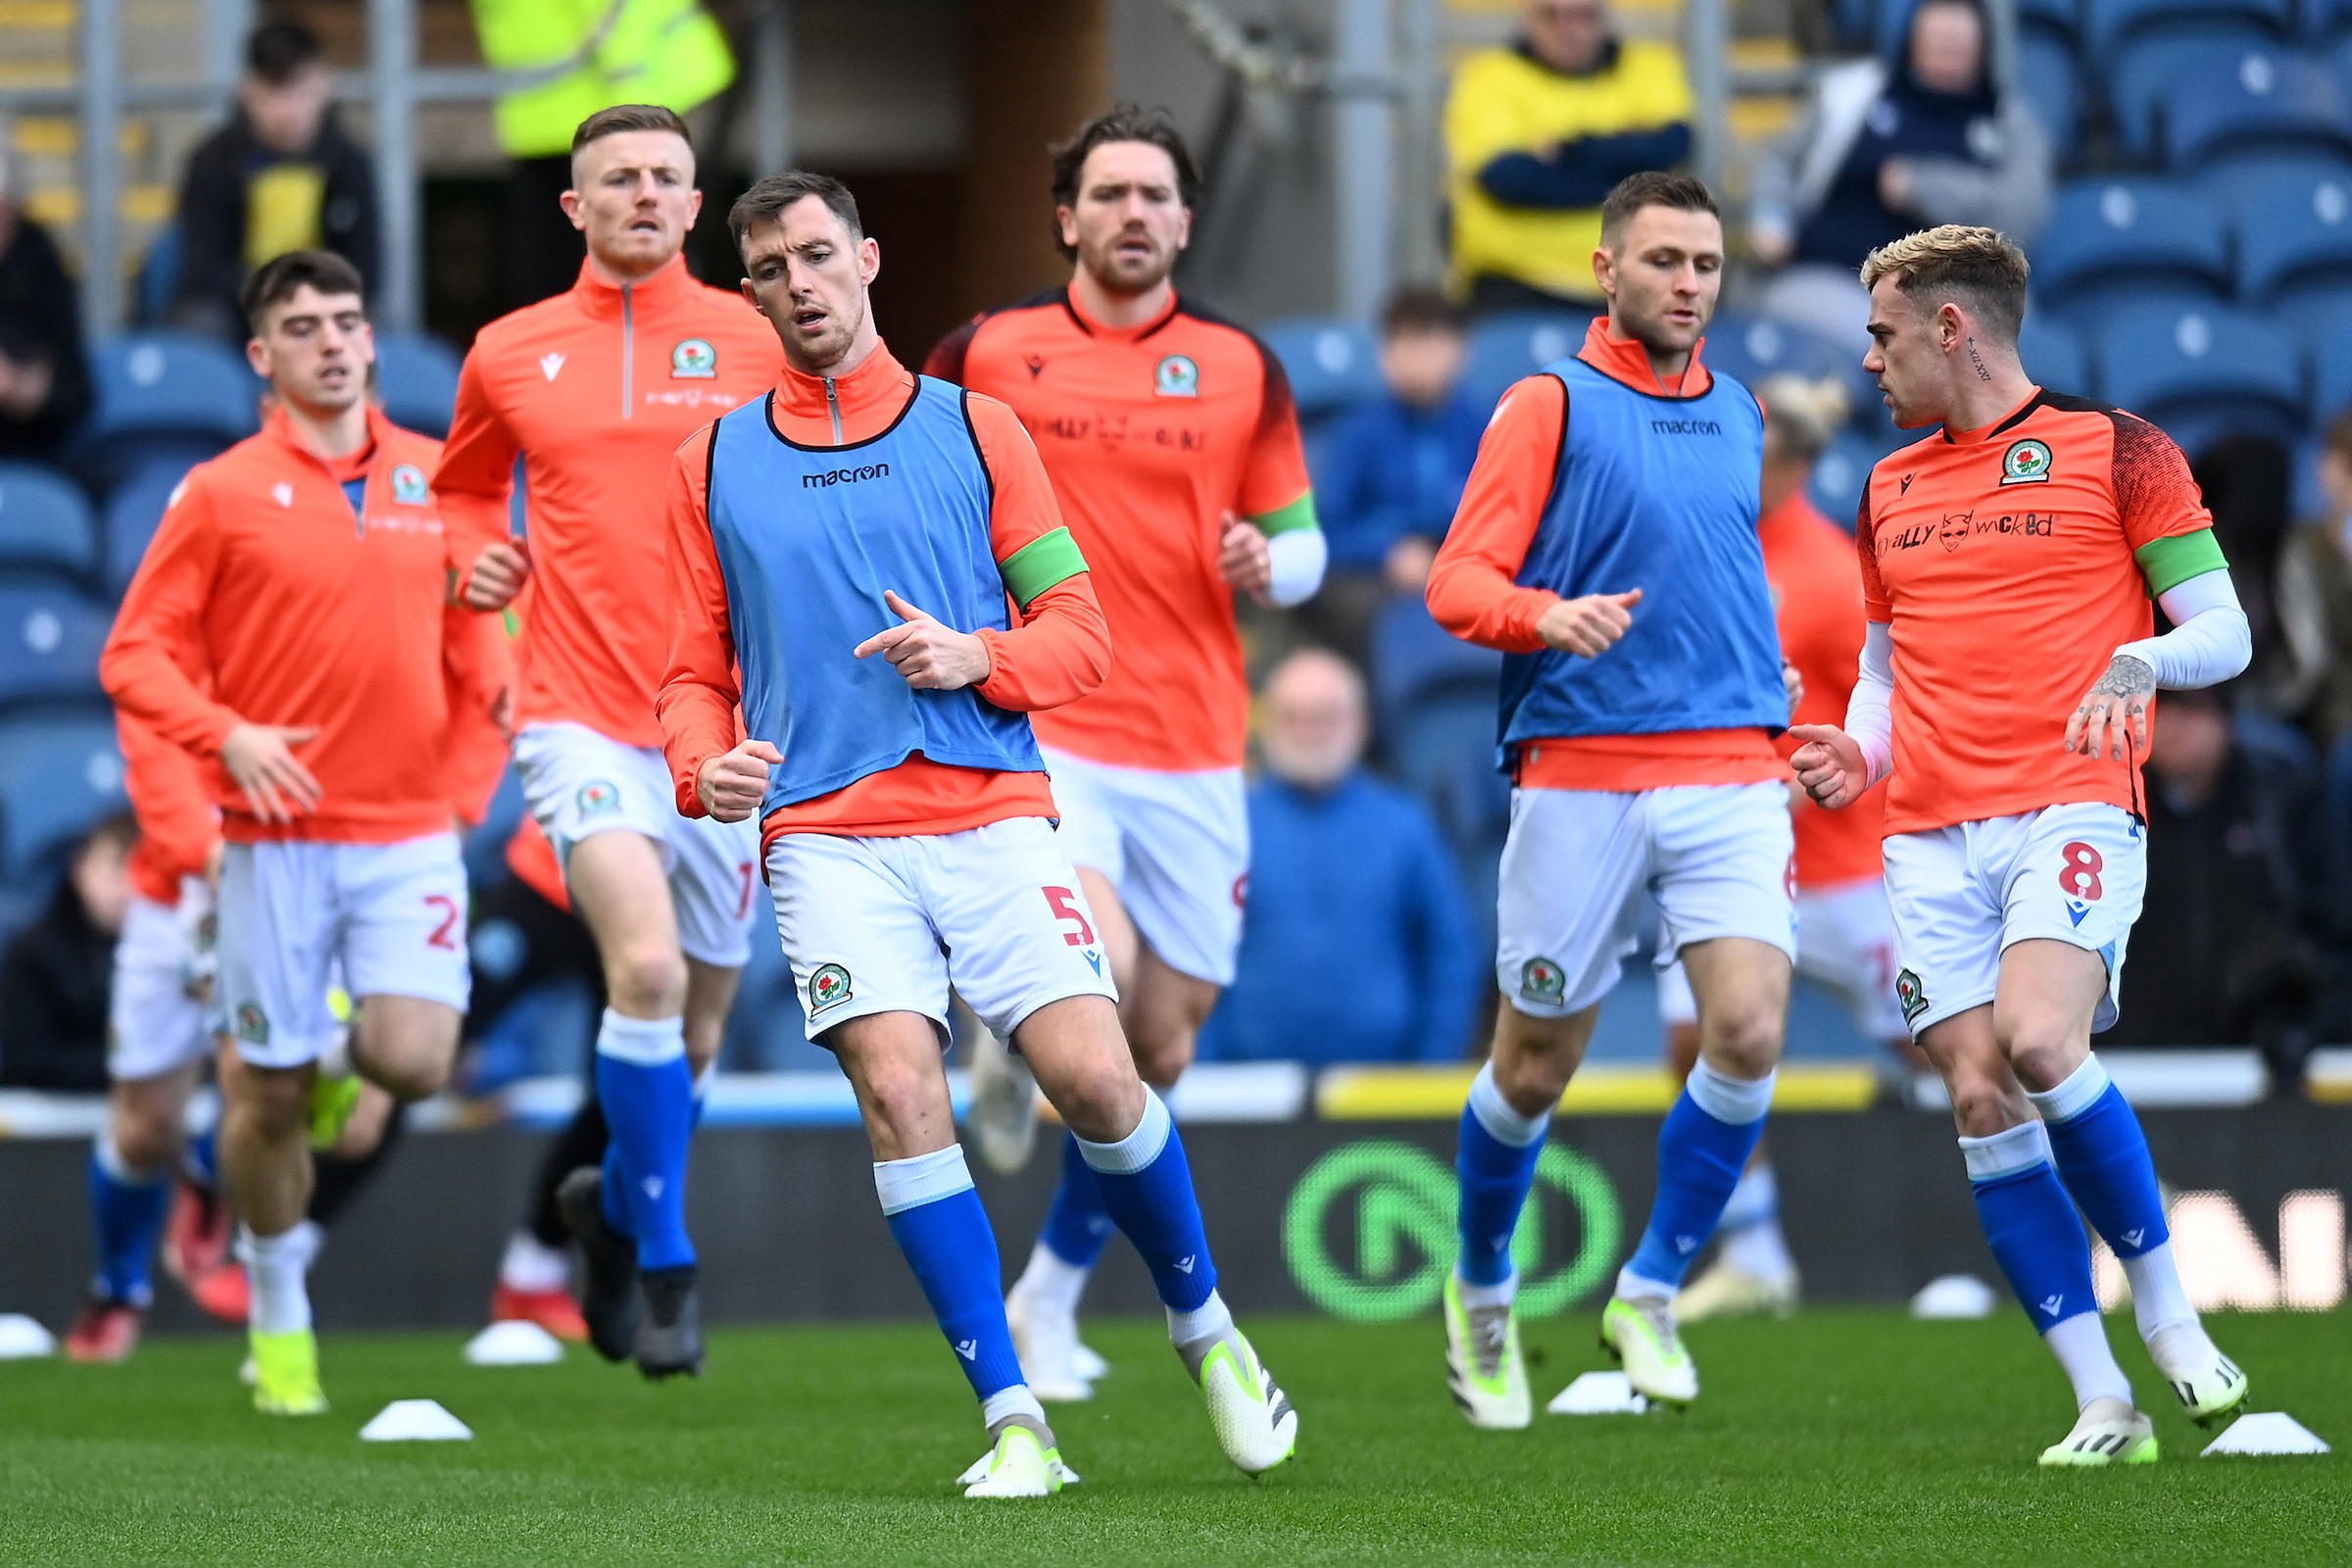 Blackburn players hold meeting with fans to address form